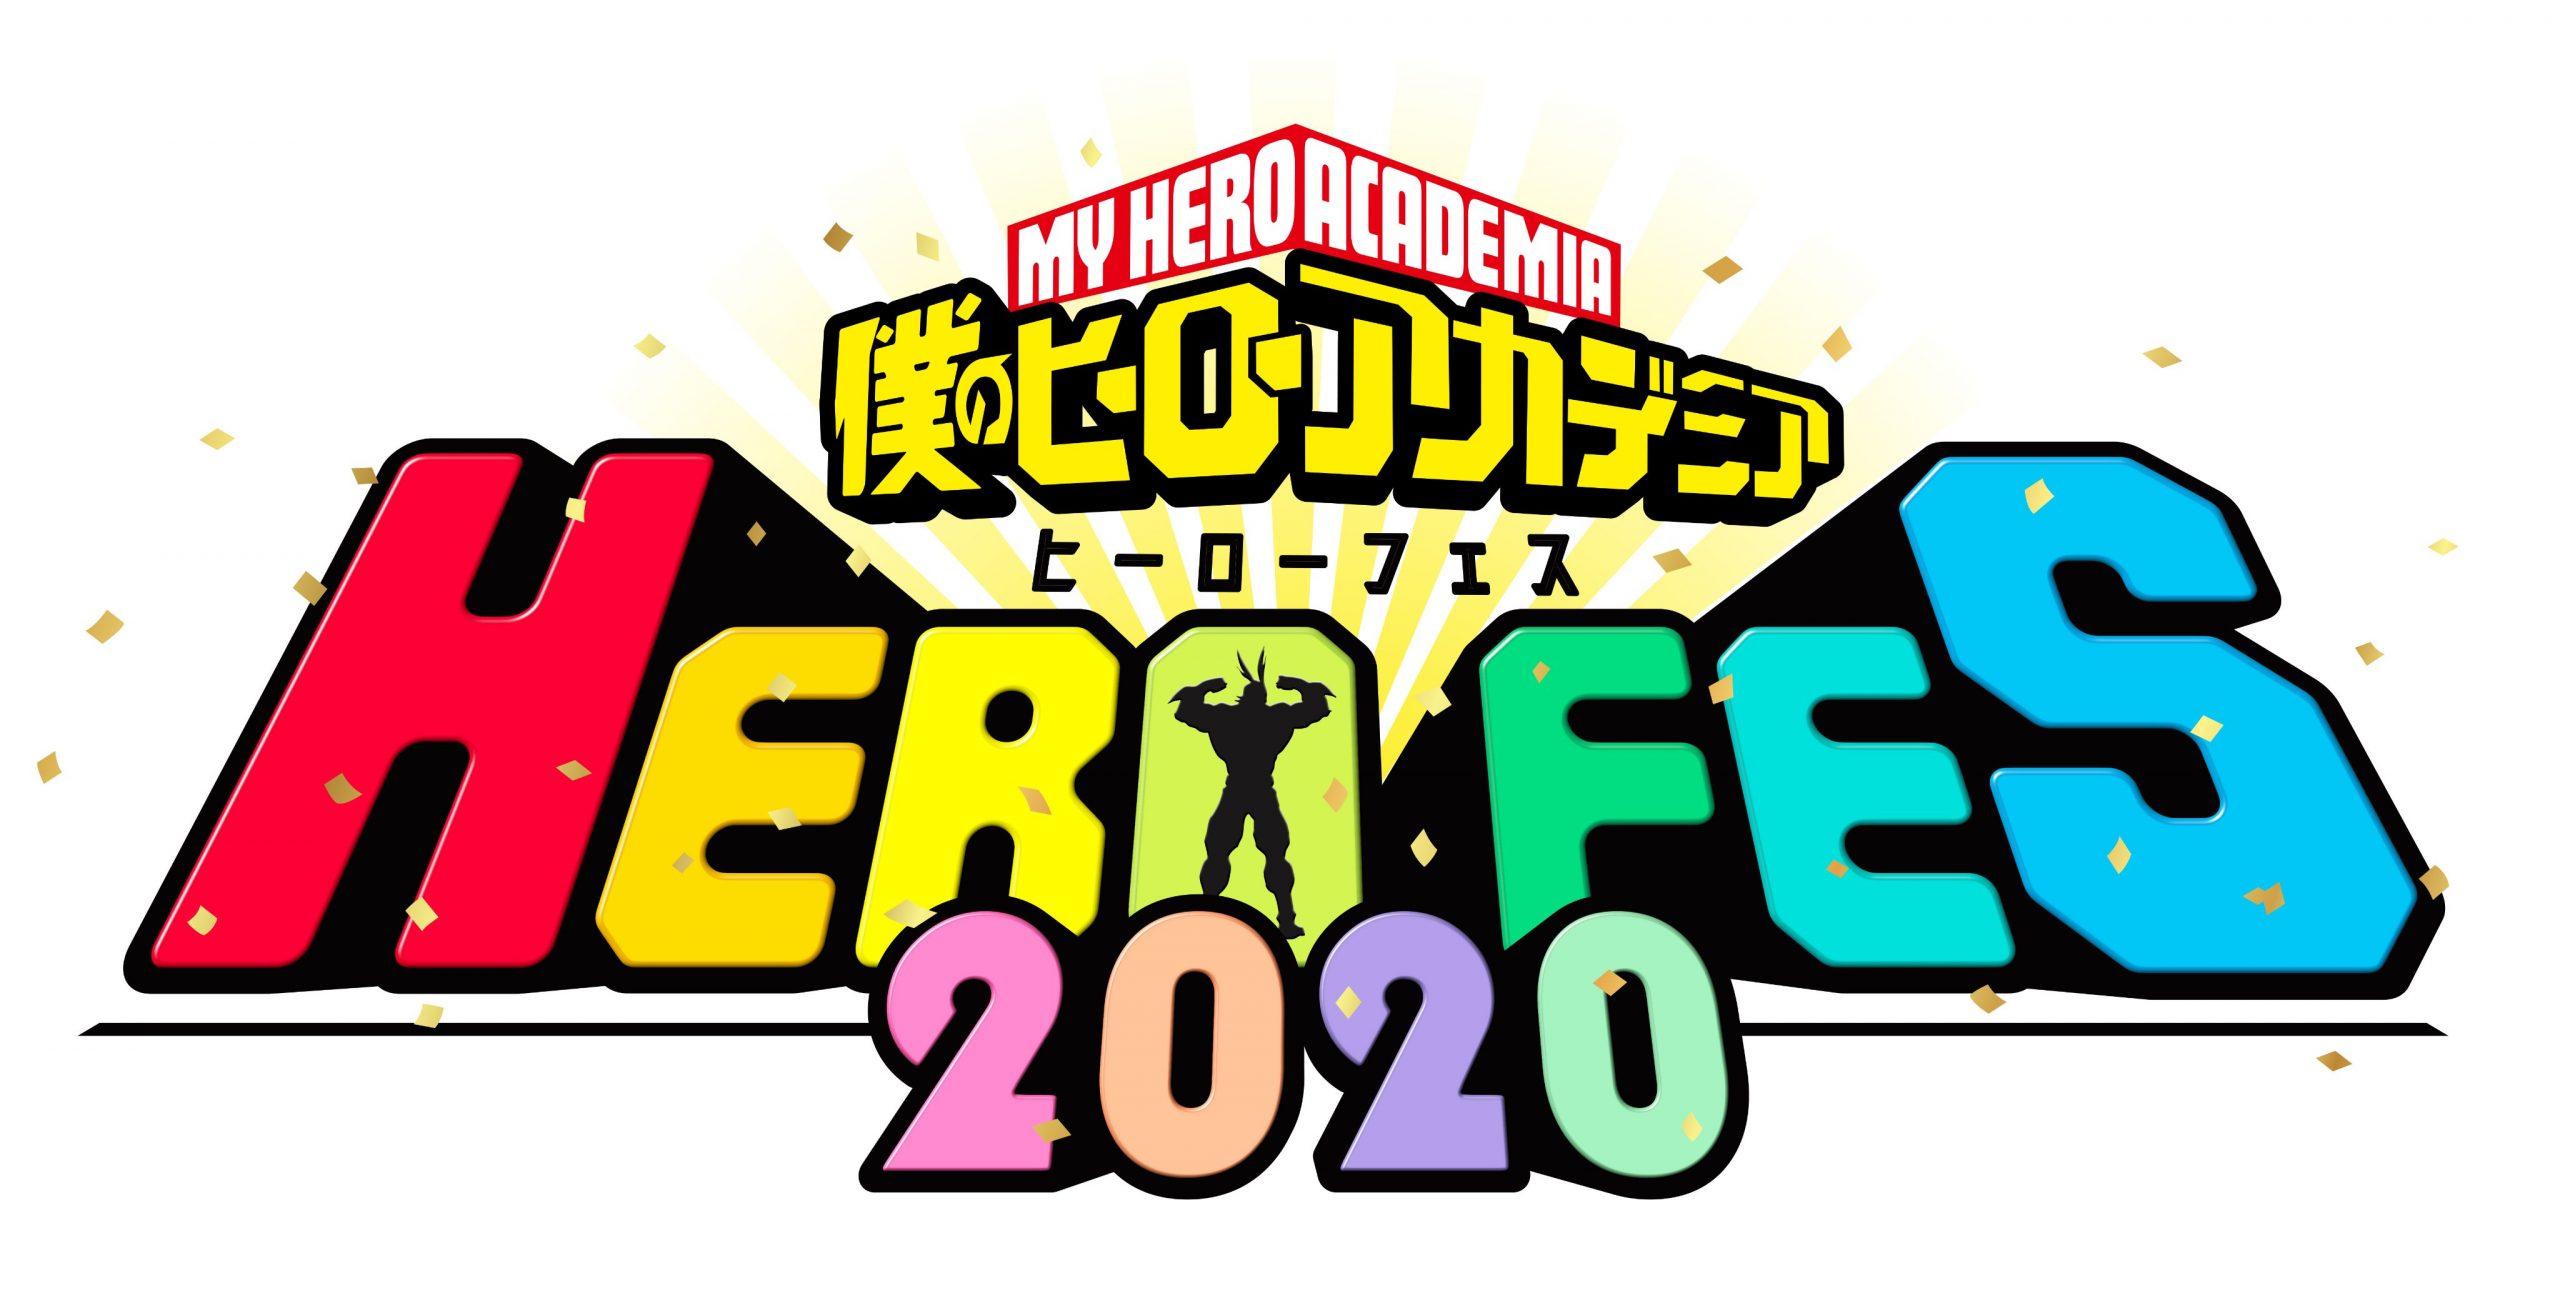 My Hero Academia Plans Online Hero Fes Event For October